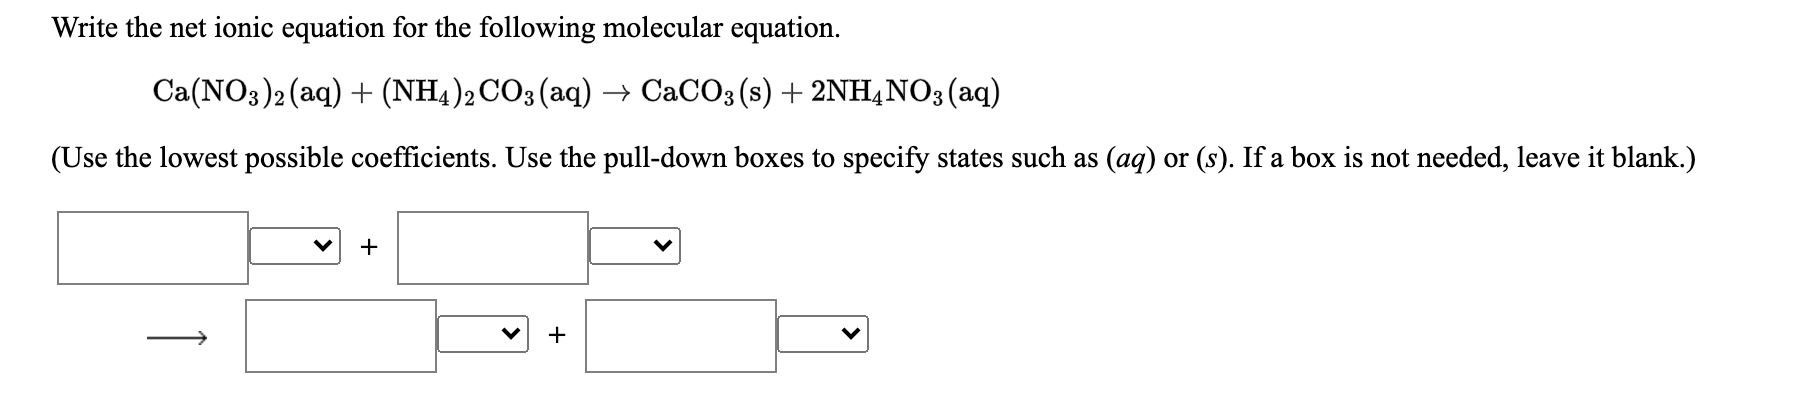 Write the net ionic equation for the following molecular equation.
Ca(NO3)2 (aq) + (NH4)2 CO3(aq) → CACO3 (s) + 2NH,NO3(aq)
(Use the lowest possible coefficients. Use the pull-down boxes to specify states such as (aq) or (s). If a box is not needed, leave it blank.)
+
+
